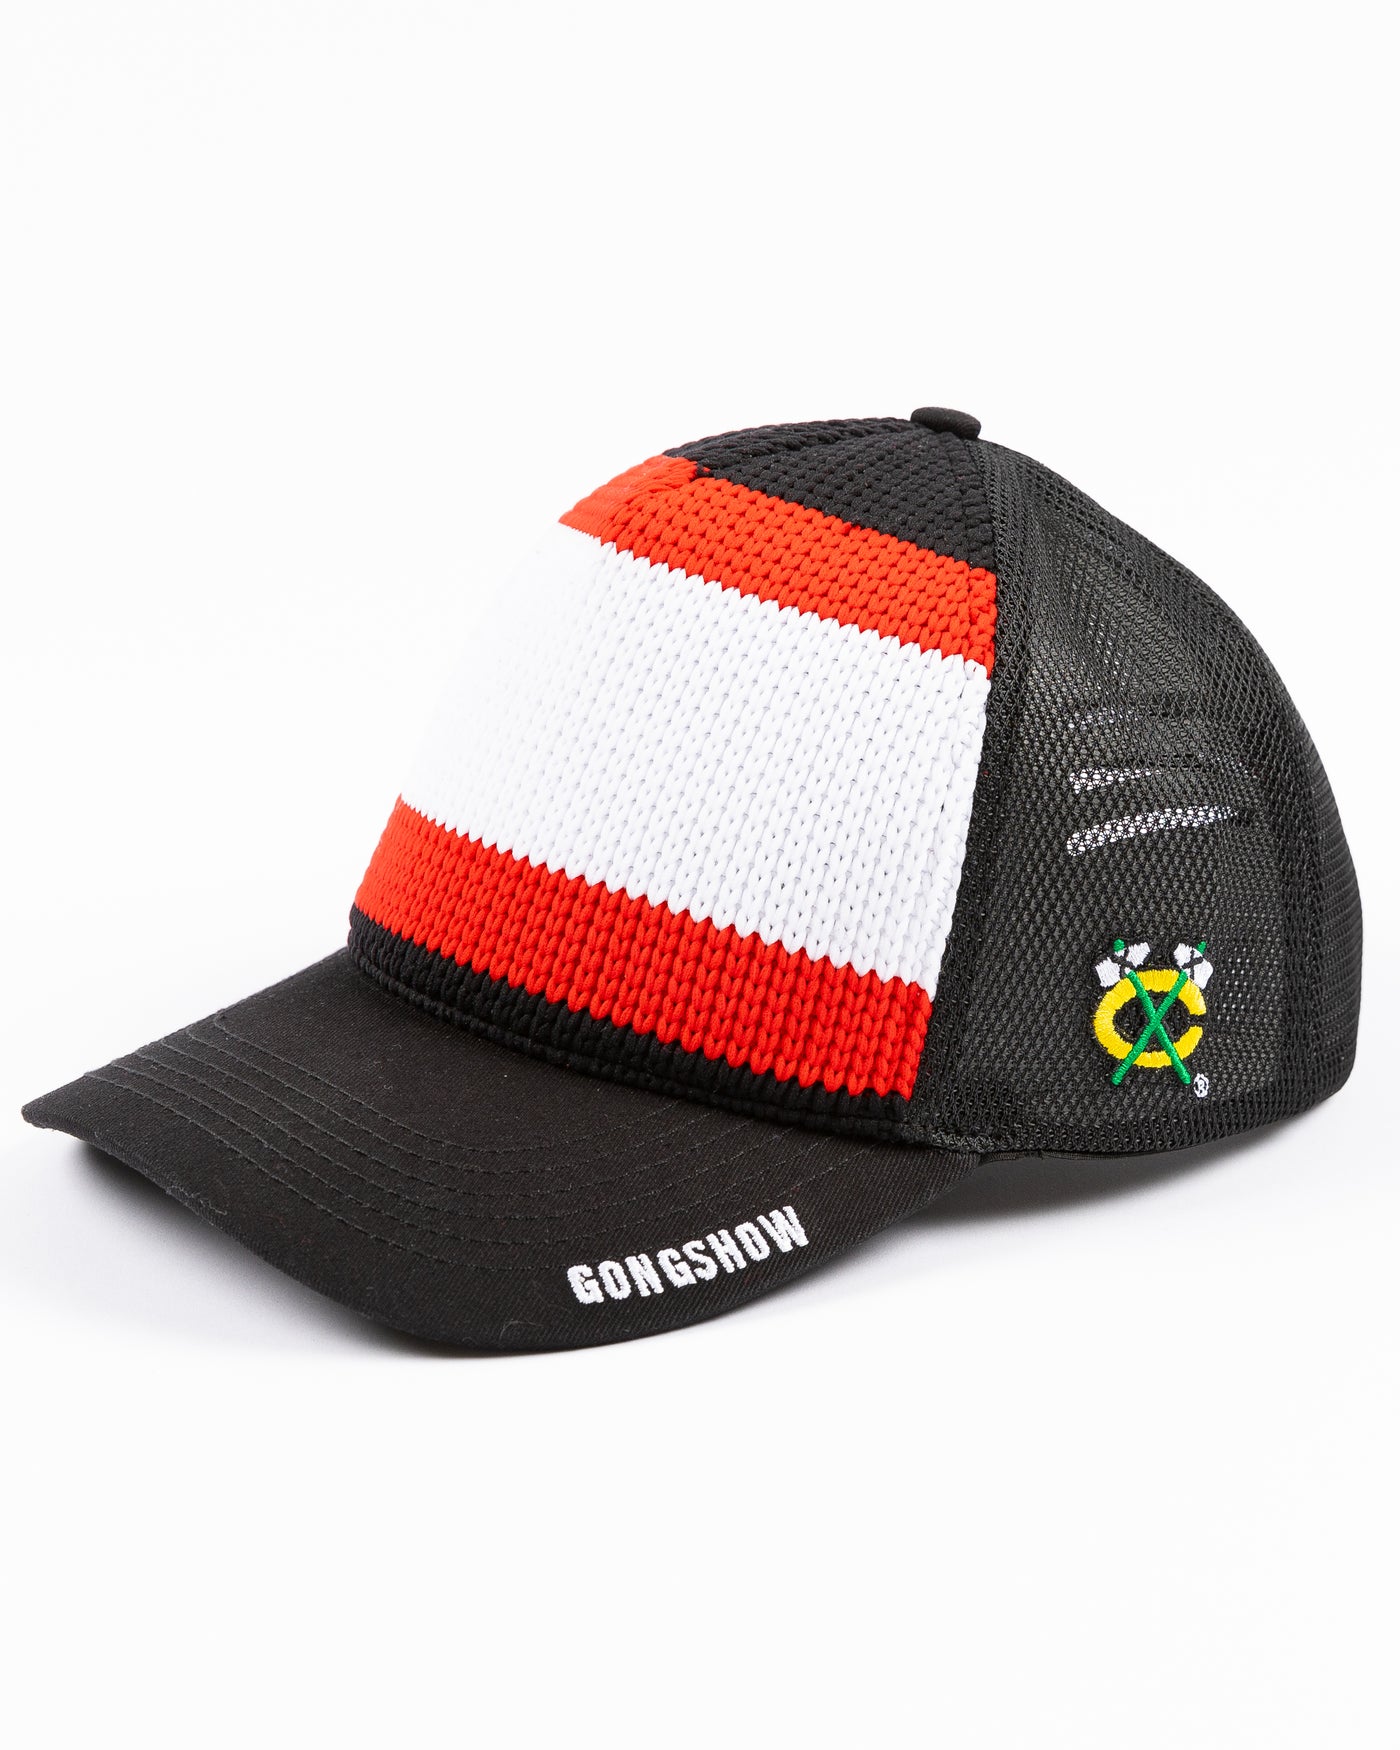 black Gongshow trucker hat with red and white stripe pattern and Chicago Blackhawks secondary logo embroidered on left side - left angle lay flat